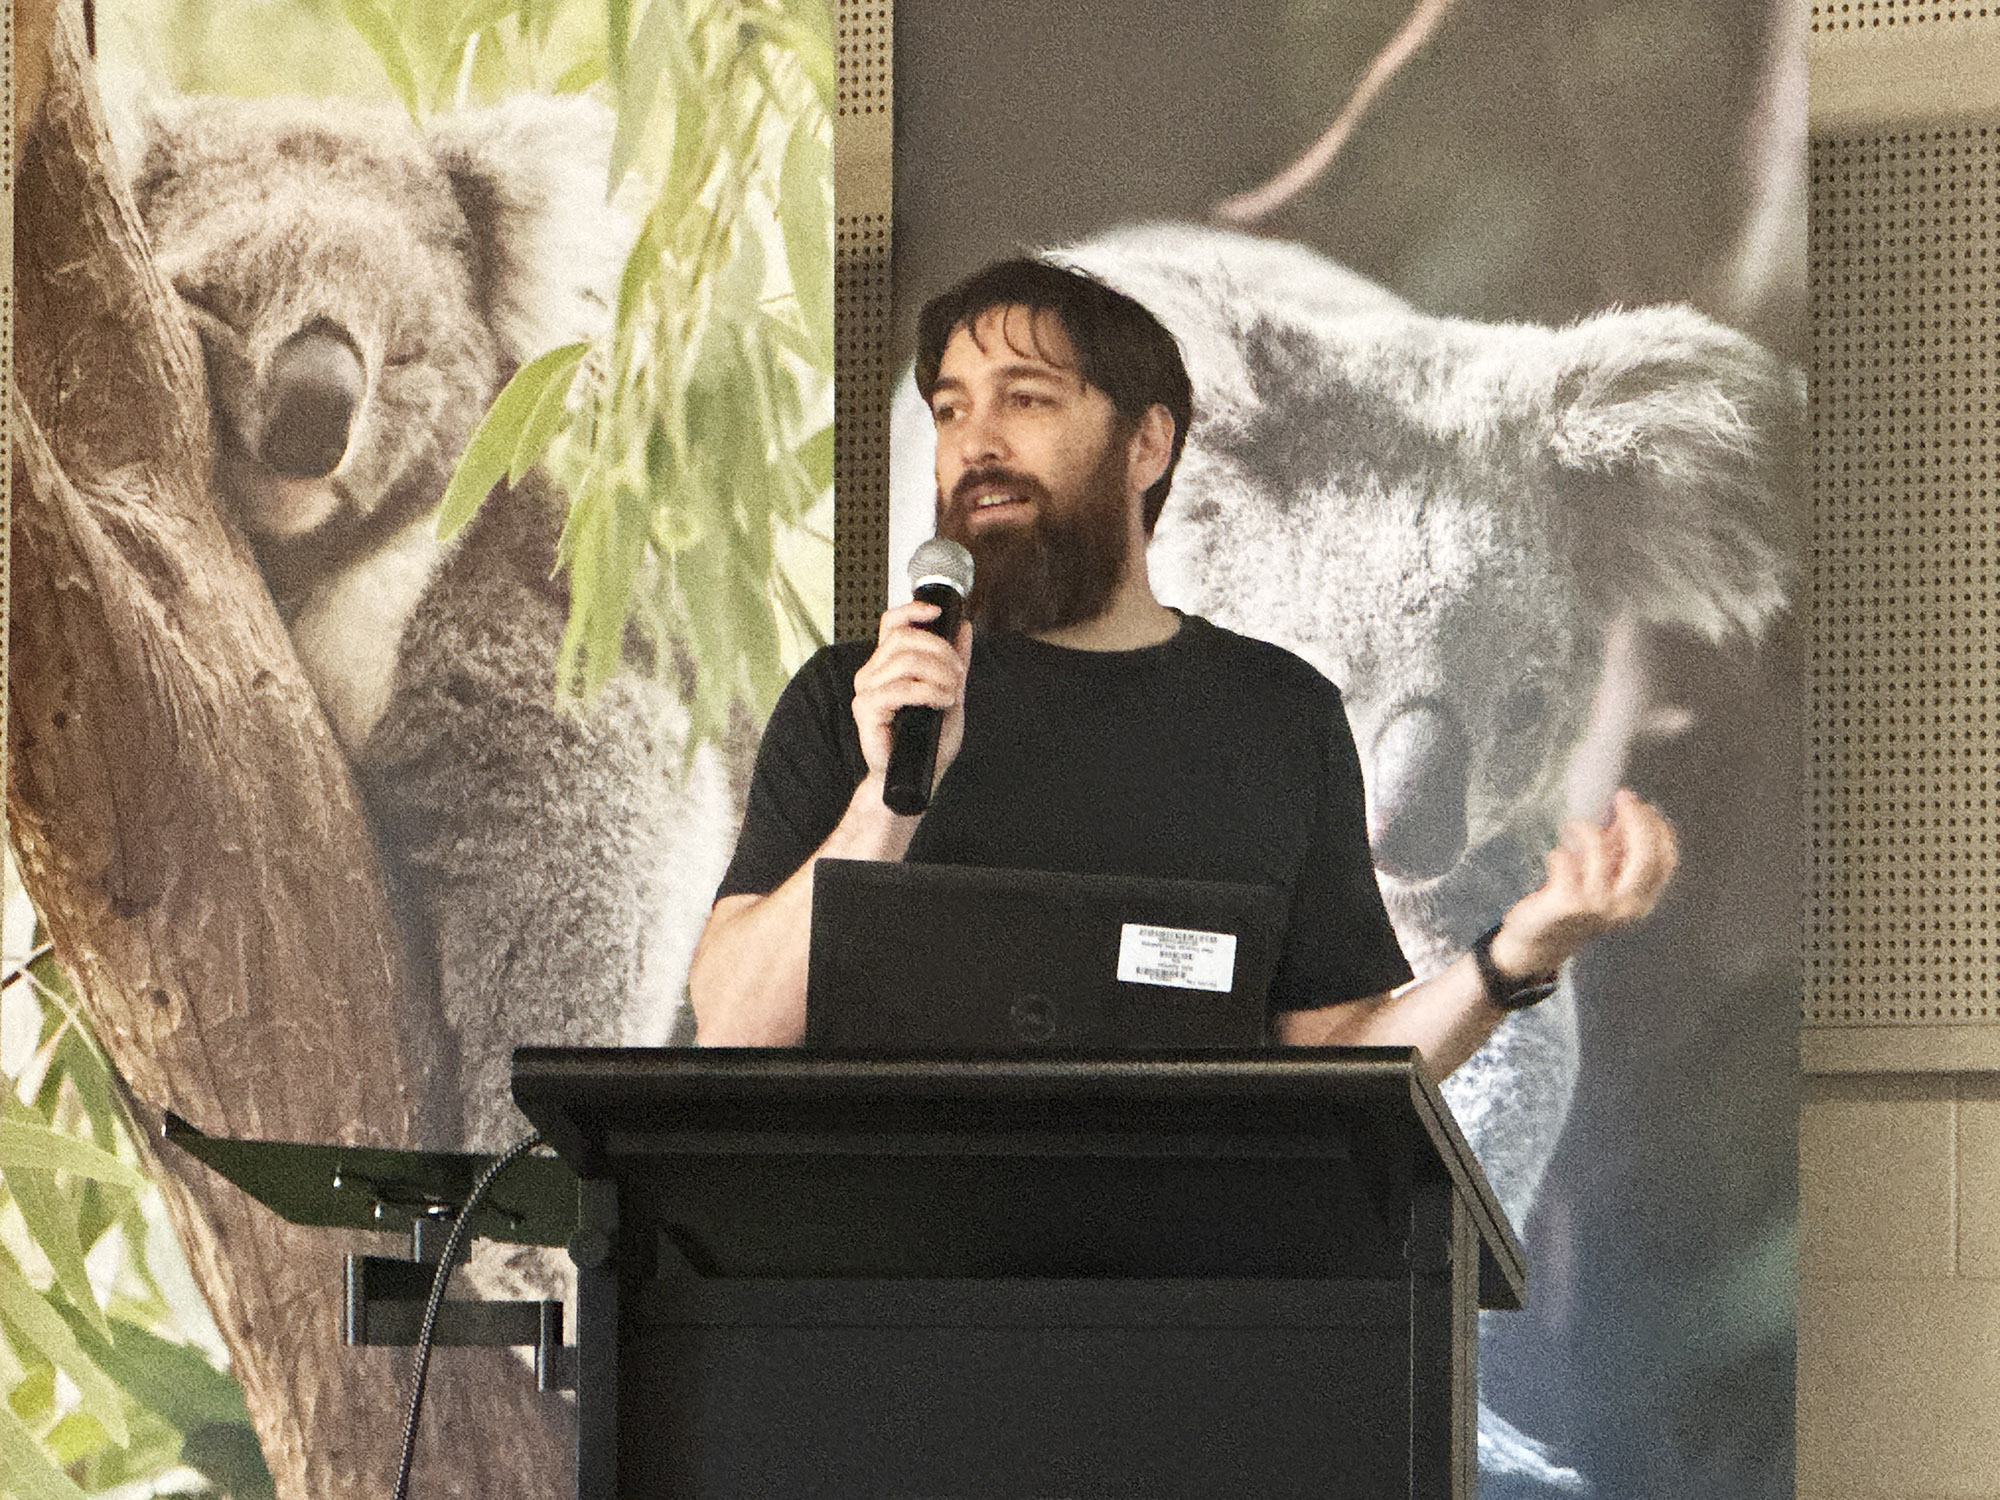 Andrew Hoskins speaking to an audience in front of large images of koalas